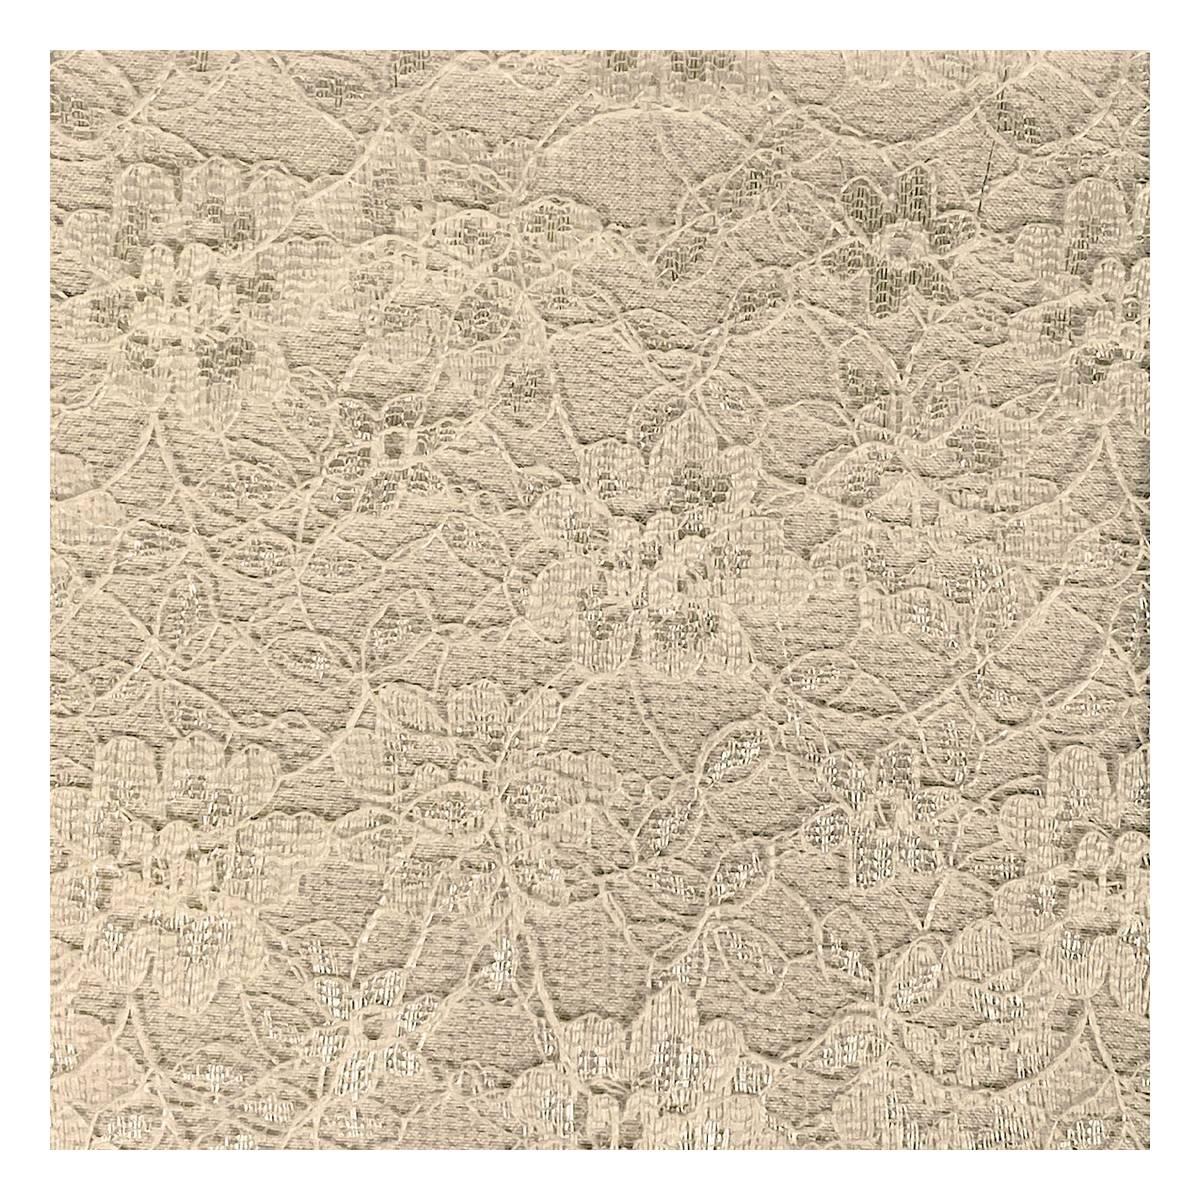 Beige Lace Fabric 